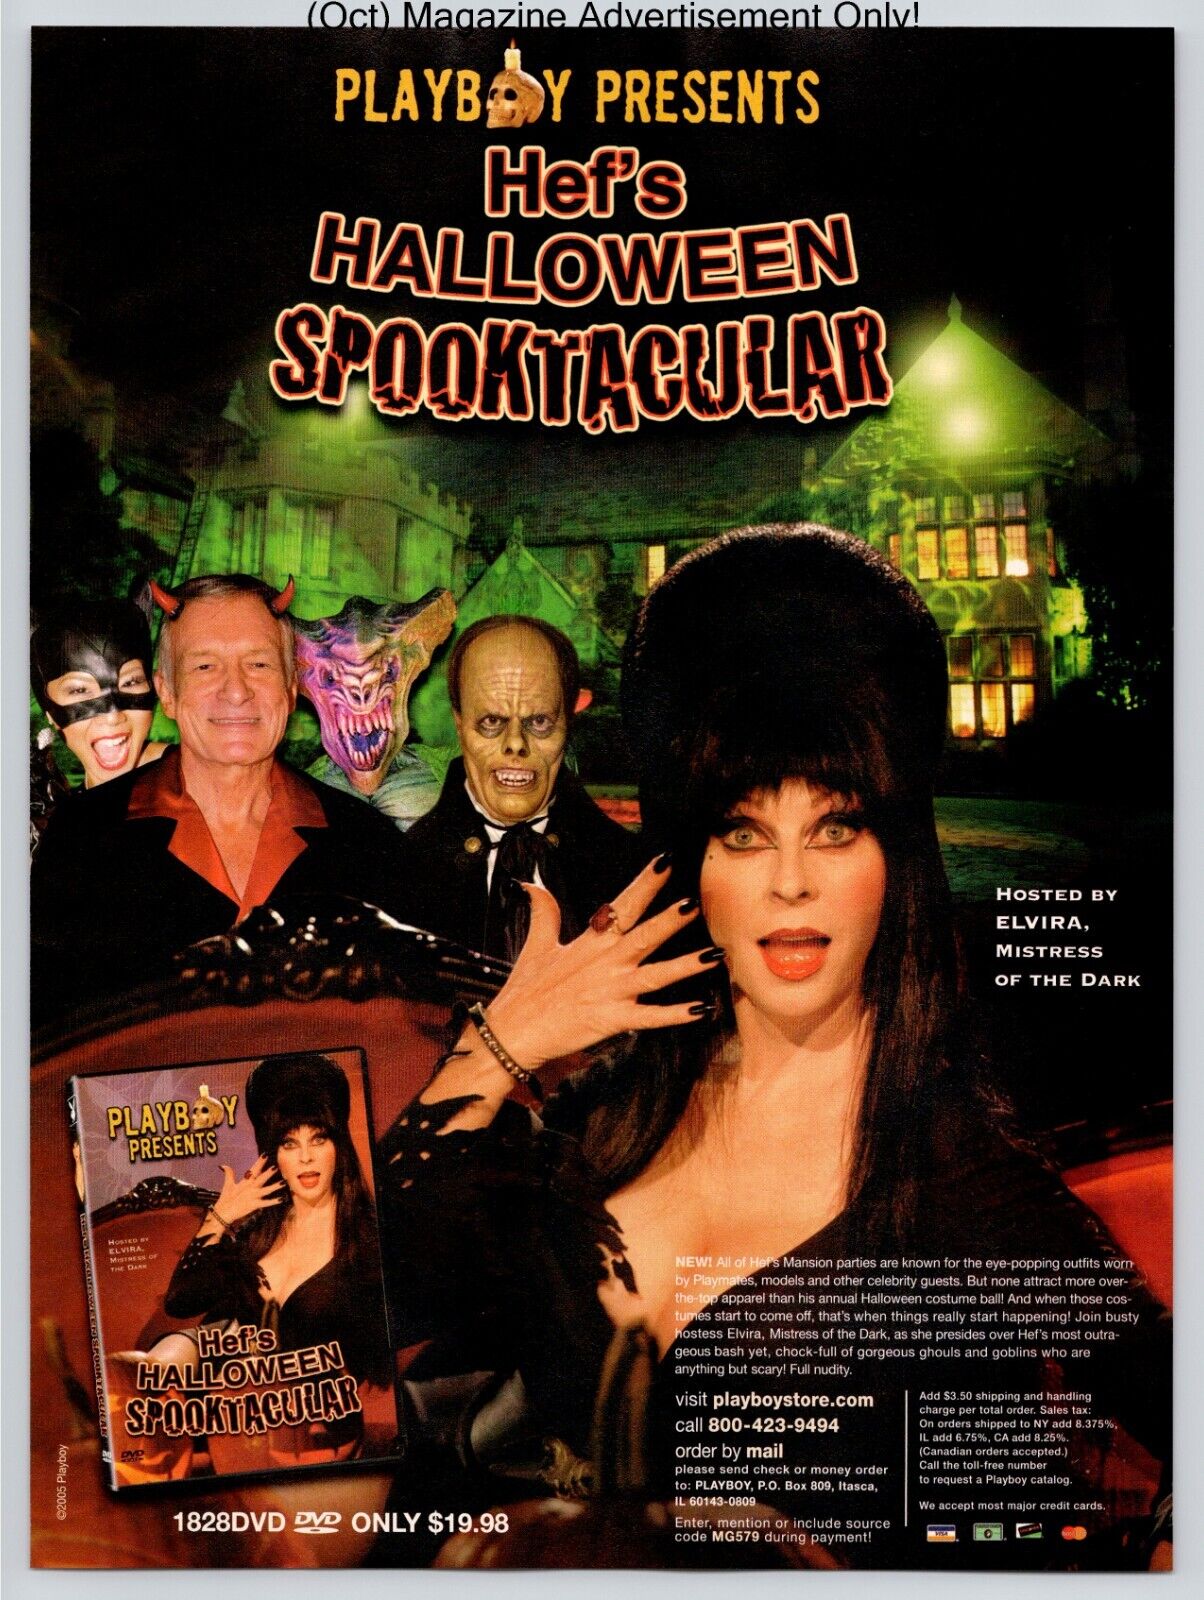 Hef\'s Halloween Spooktacular Hosted By Elvira Promo 2005 Full Page Print Ad